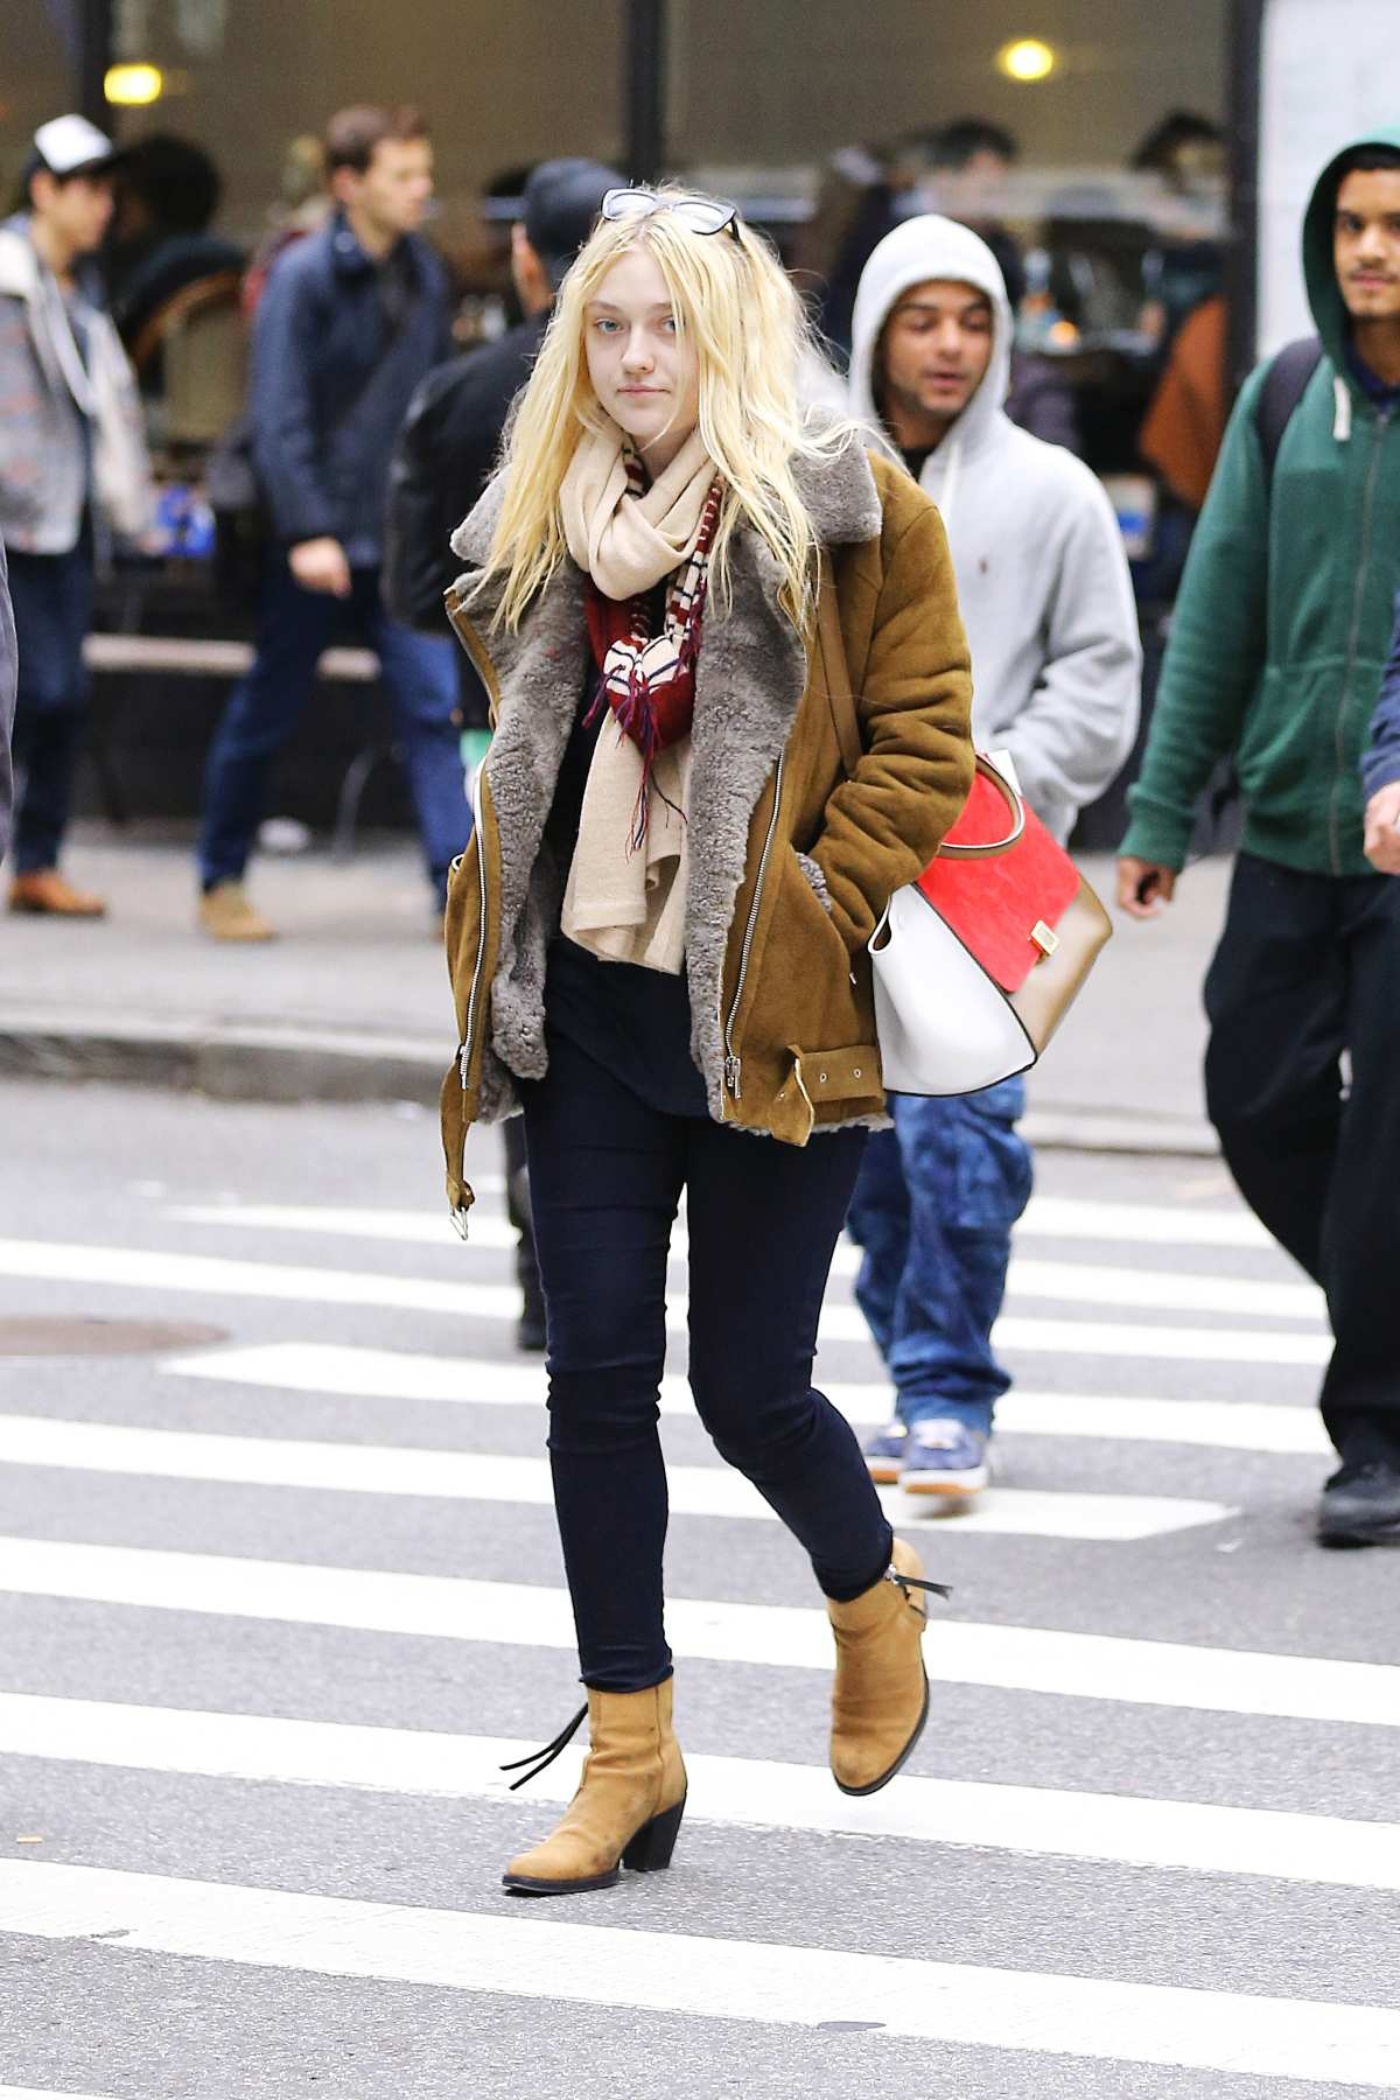 Dakota Fanning in New York City submitted by Canary + Rook